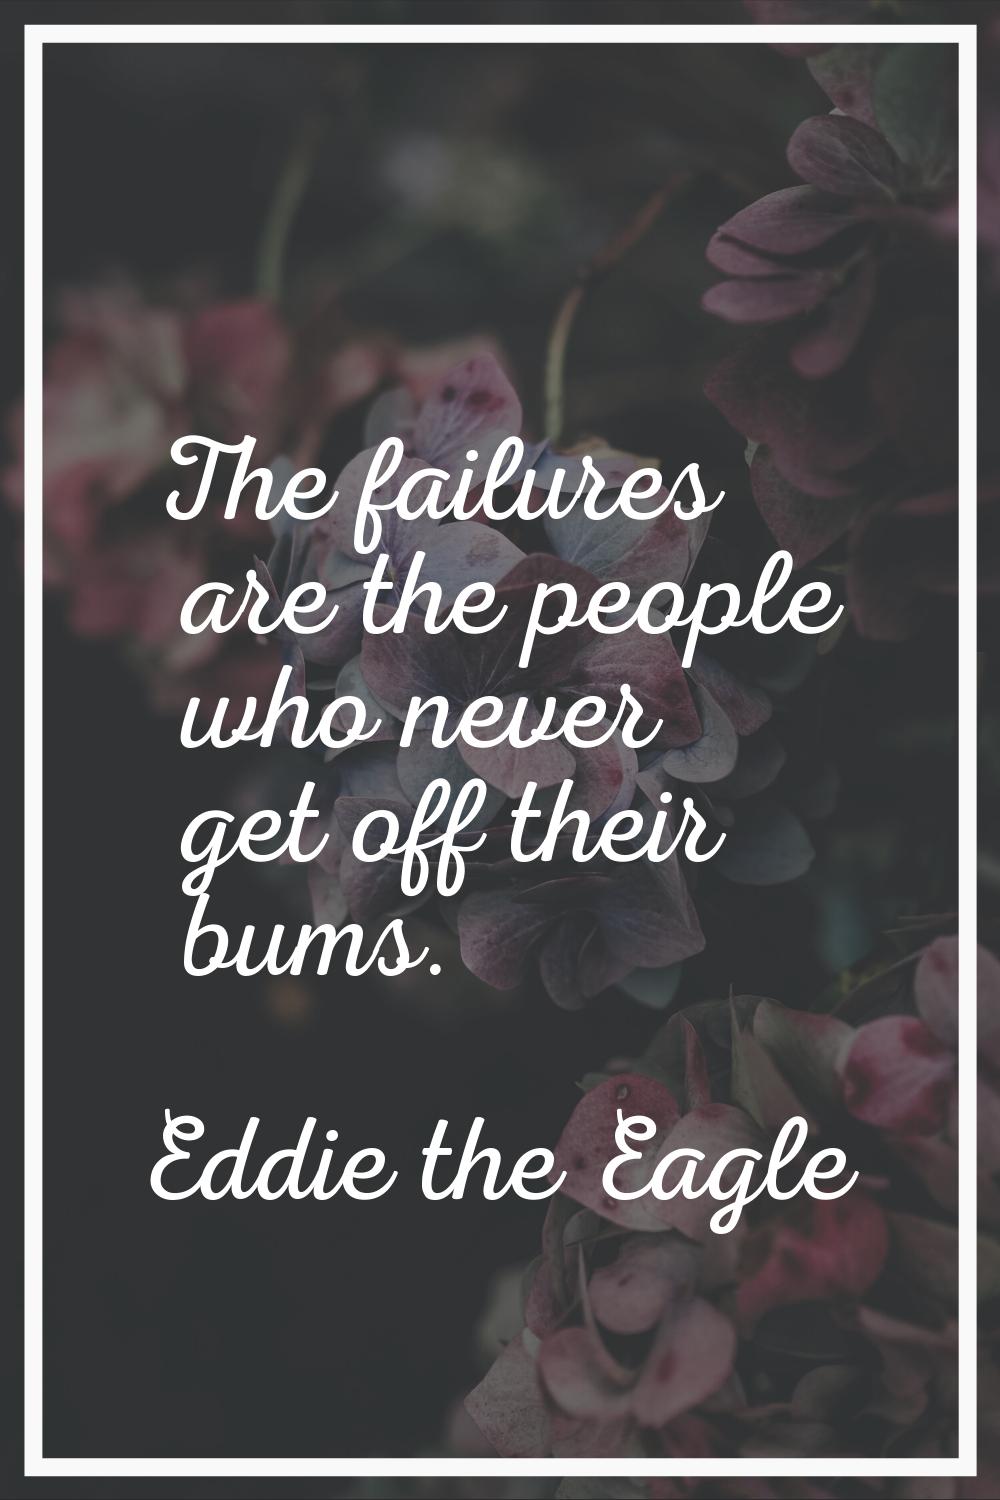 The failures are the people who never get off their bums.